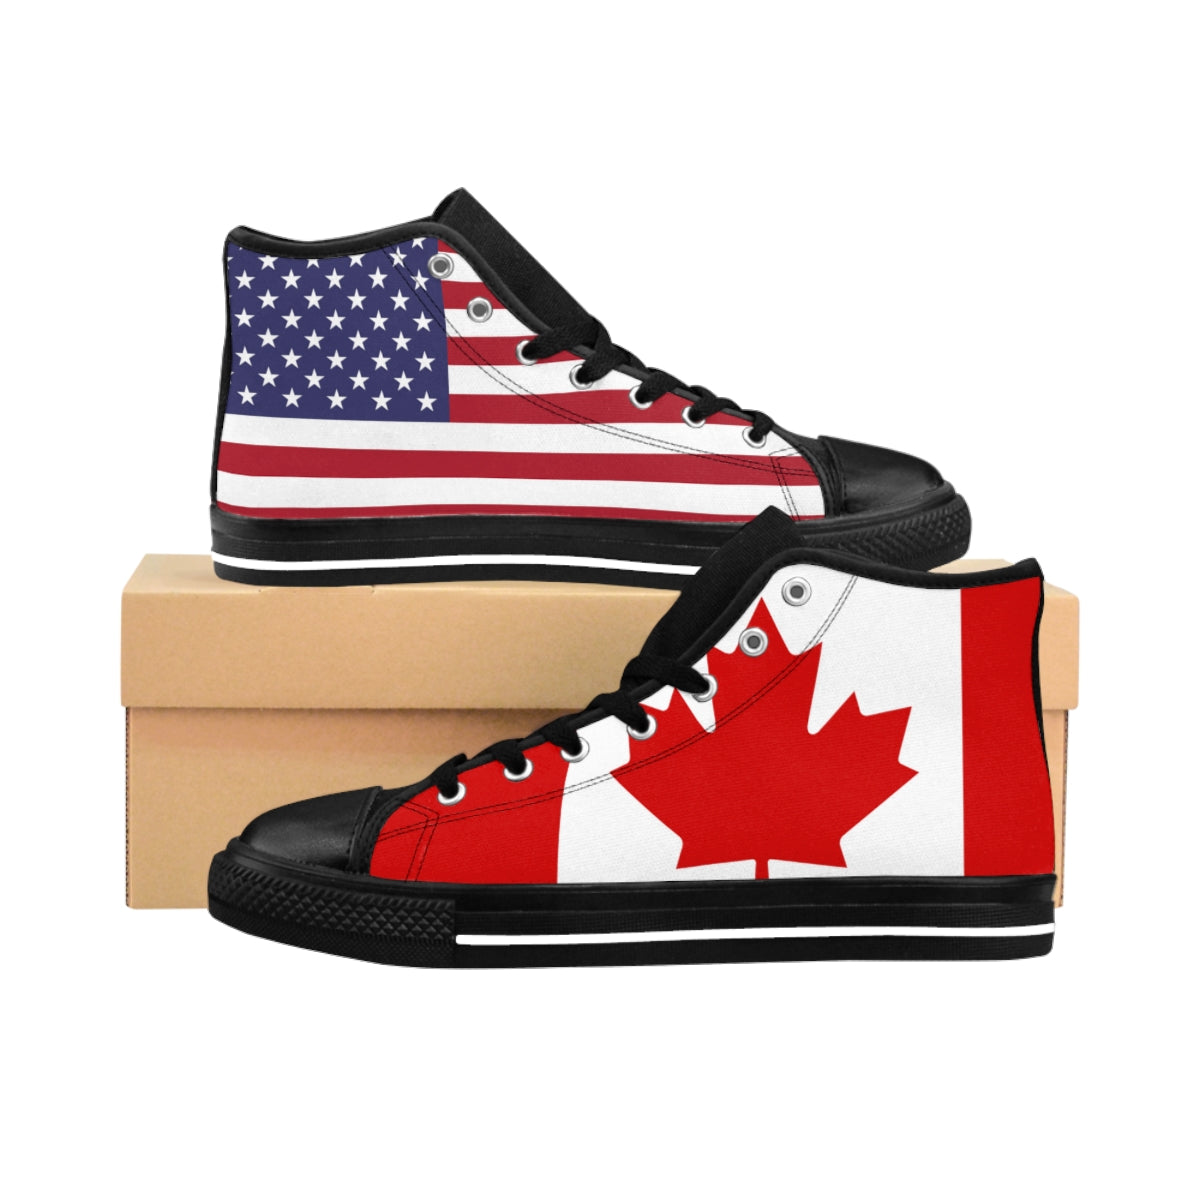 US vs Sneakers – Oh Canada